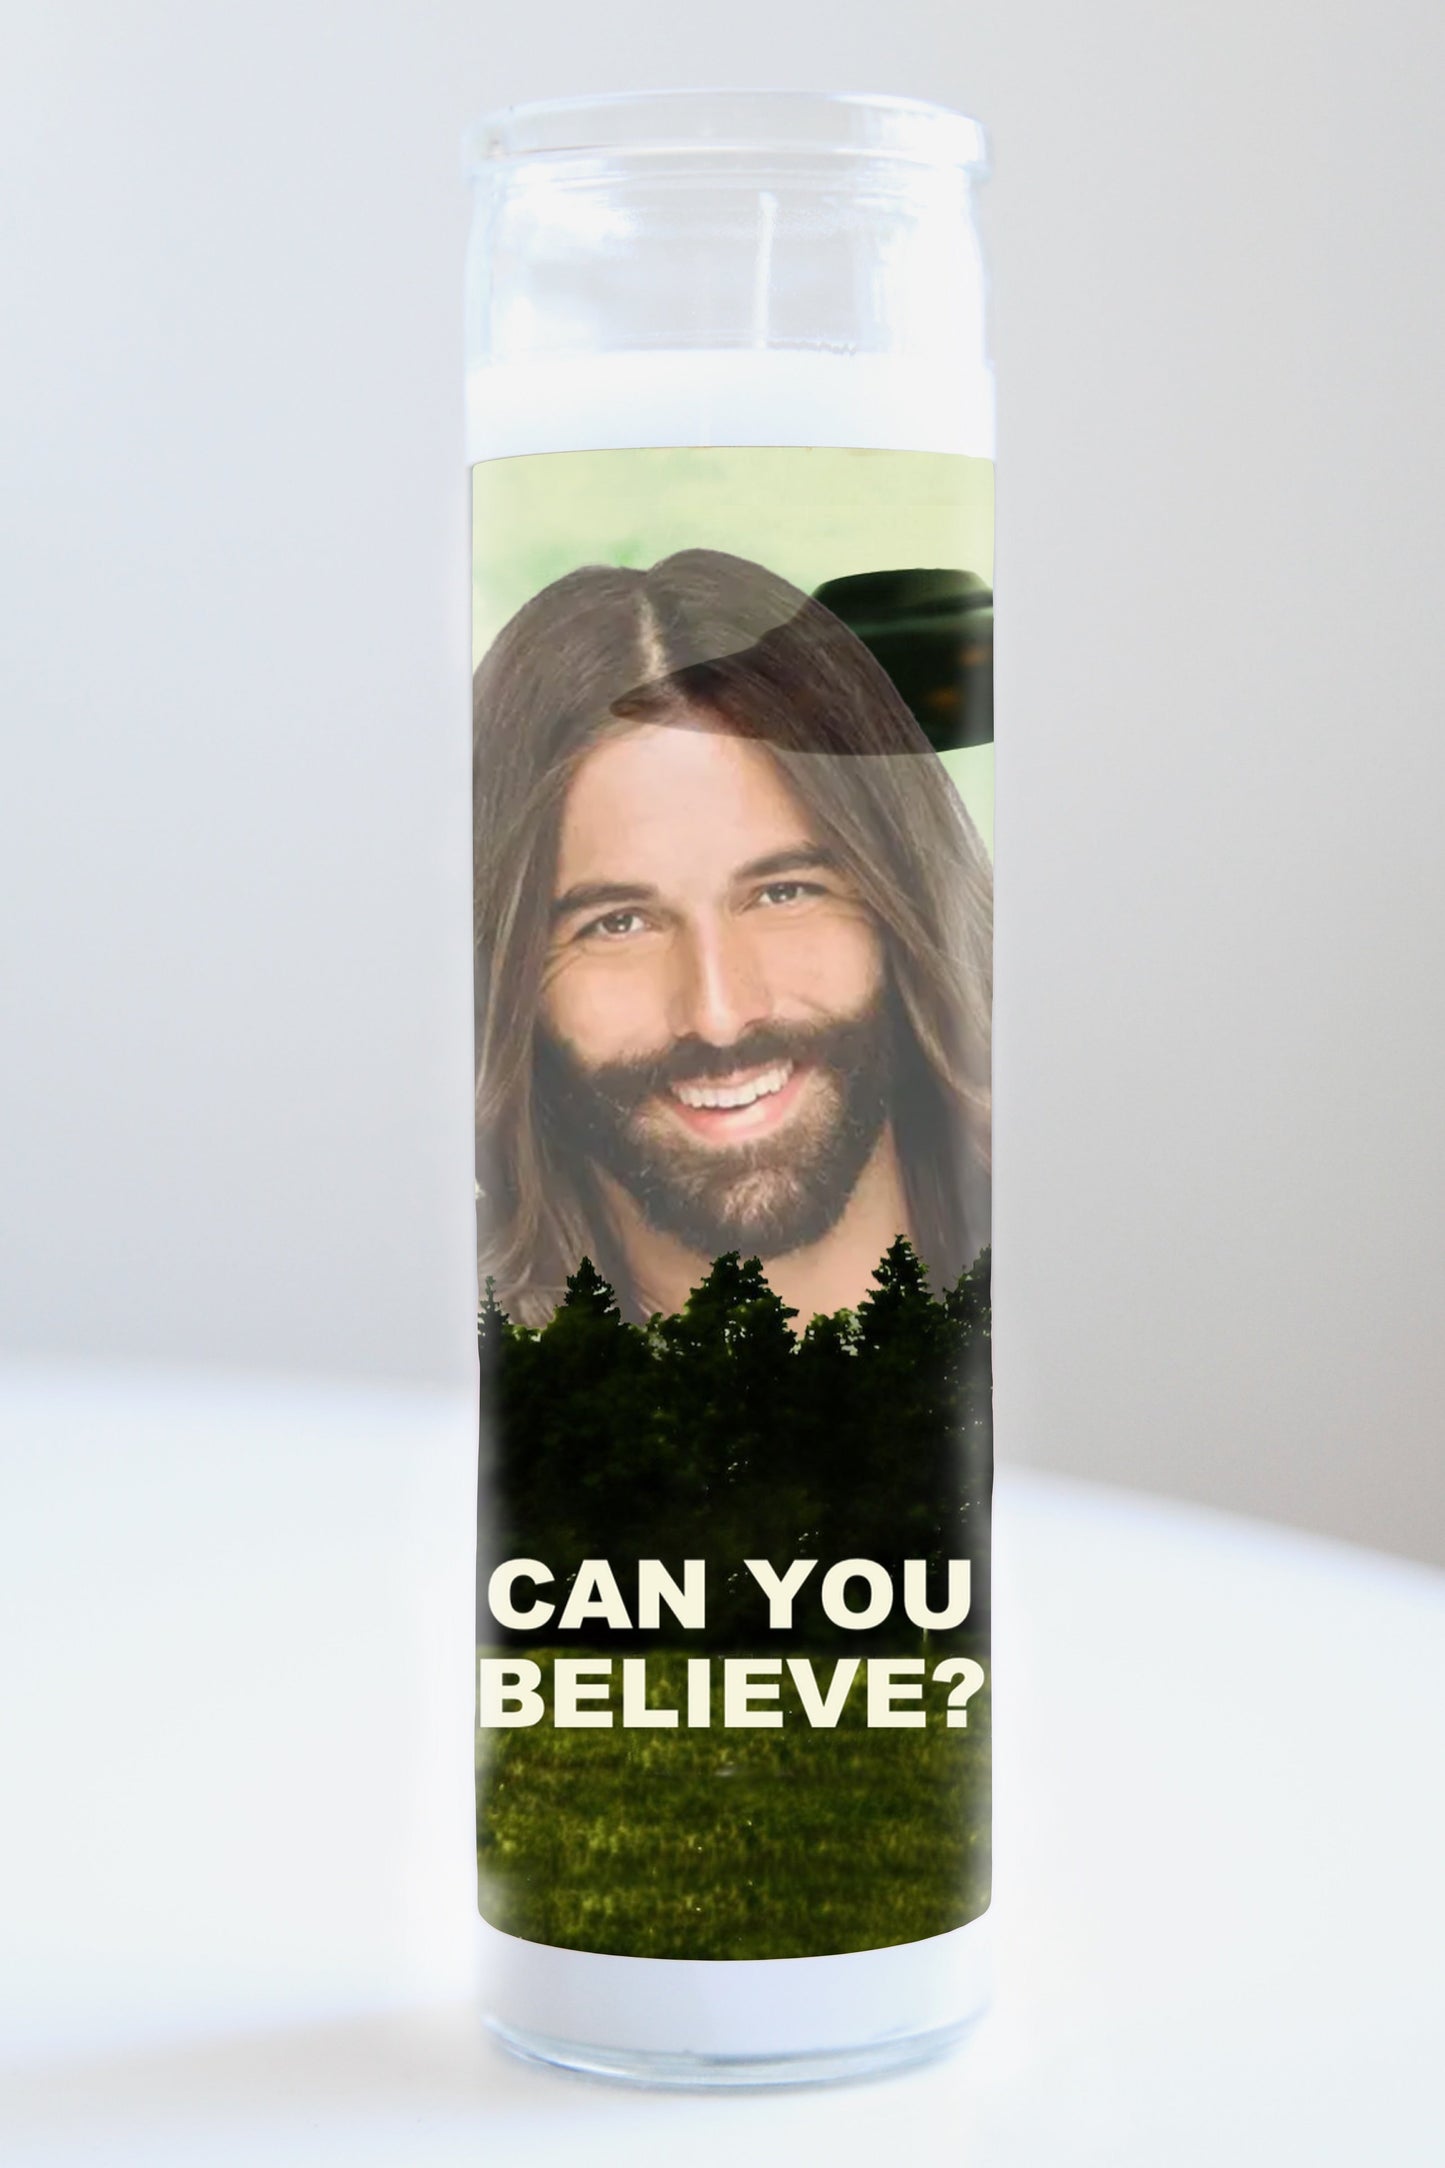 Jonathan Van Ness (Queer Eye) "Can You Believe?" Candle